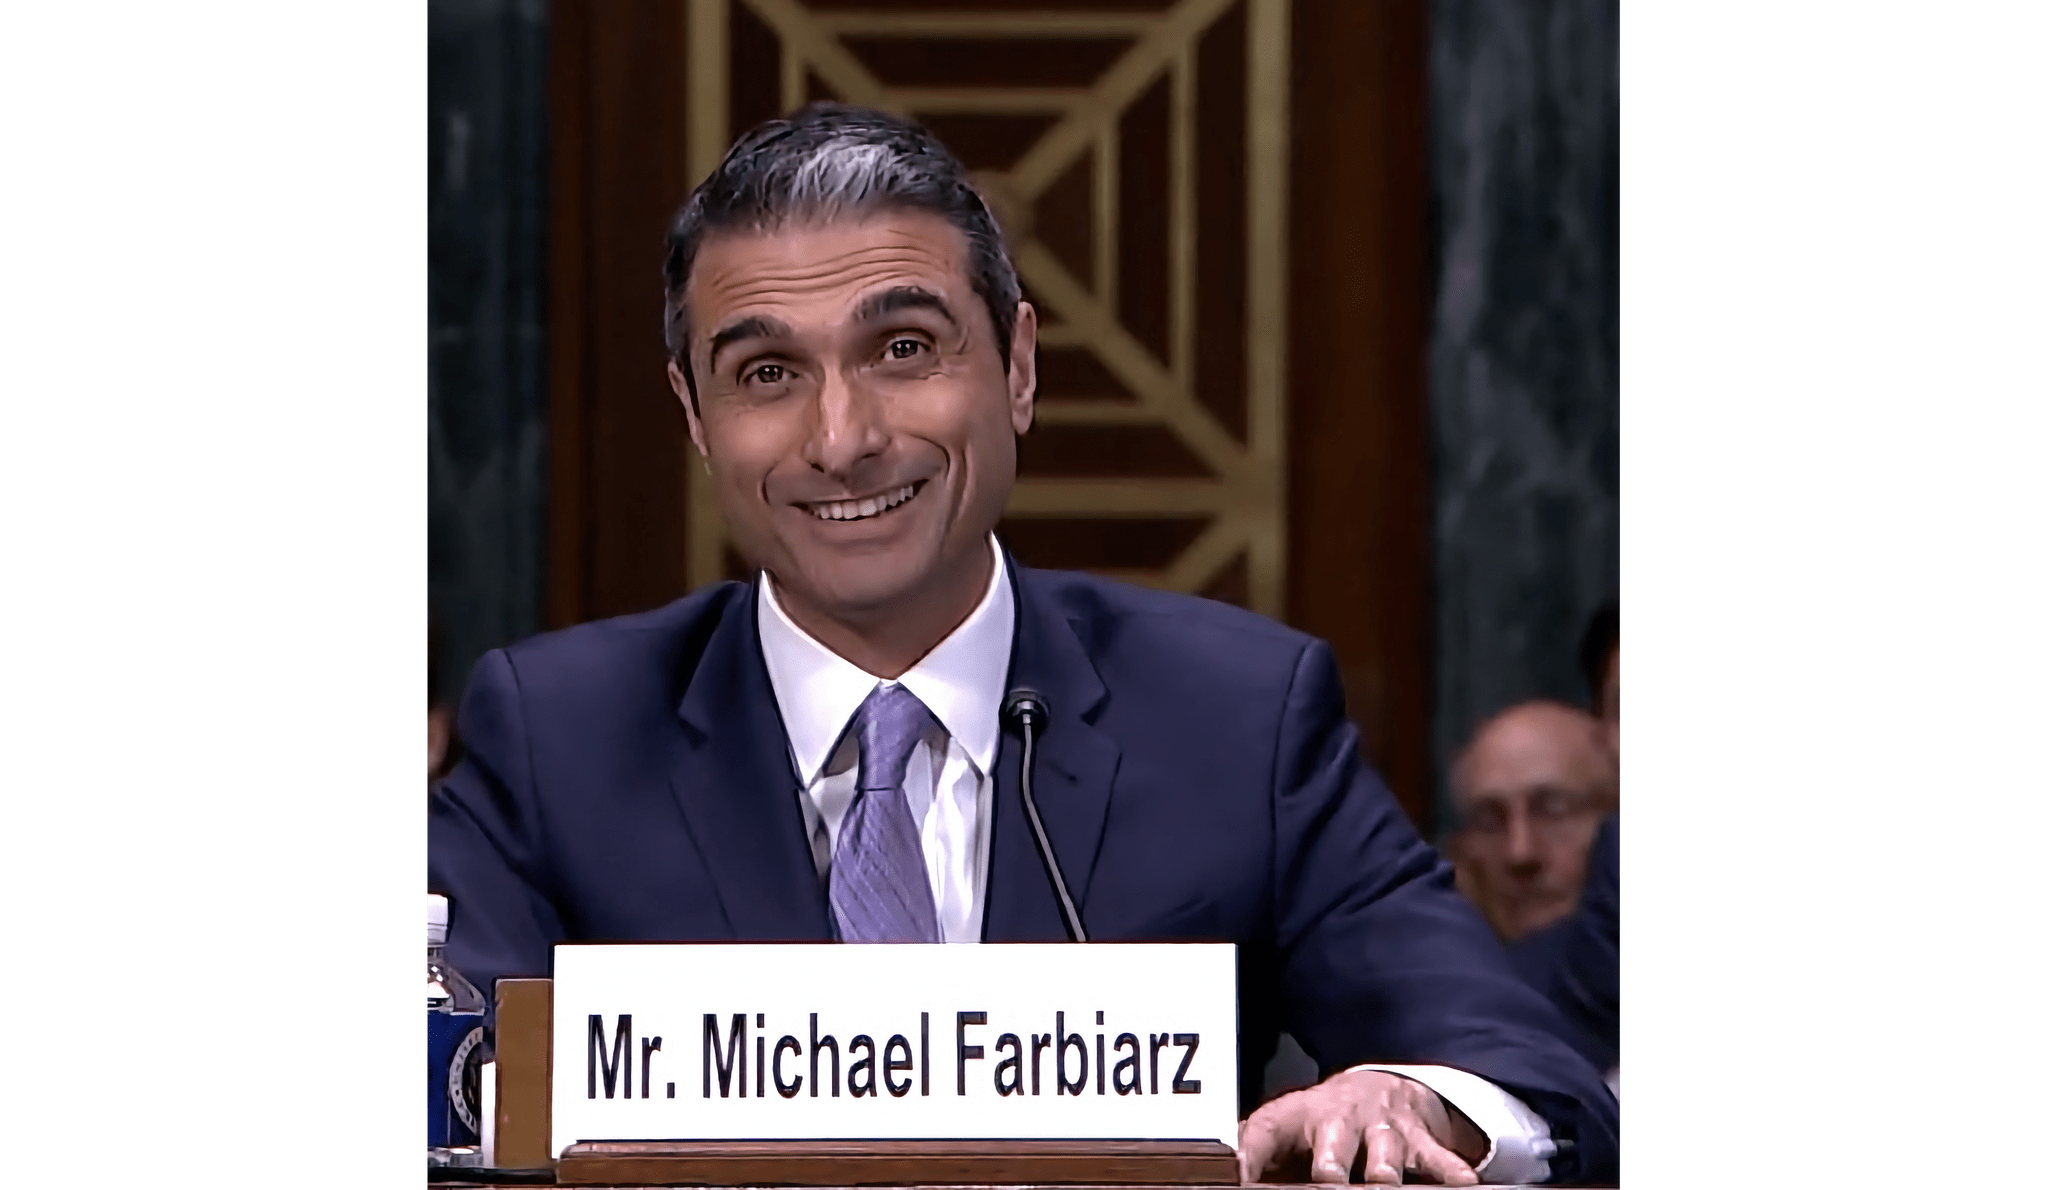 Say hello to Judge Farbiarz, who will be overseeing the DOJ's case against Apple. Source: [Wikipedia](https://feed.feedburster.com/macstoriesnet/redirect?url=https://en.wikipedia.org/wiki/Michael_E._Farbiarz#/media/File:Michael_Farbiarz.jpg).